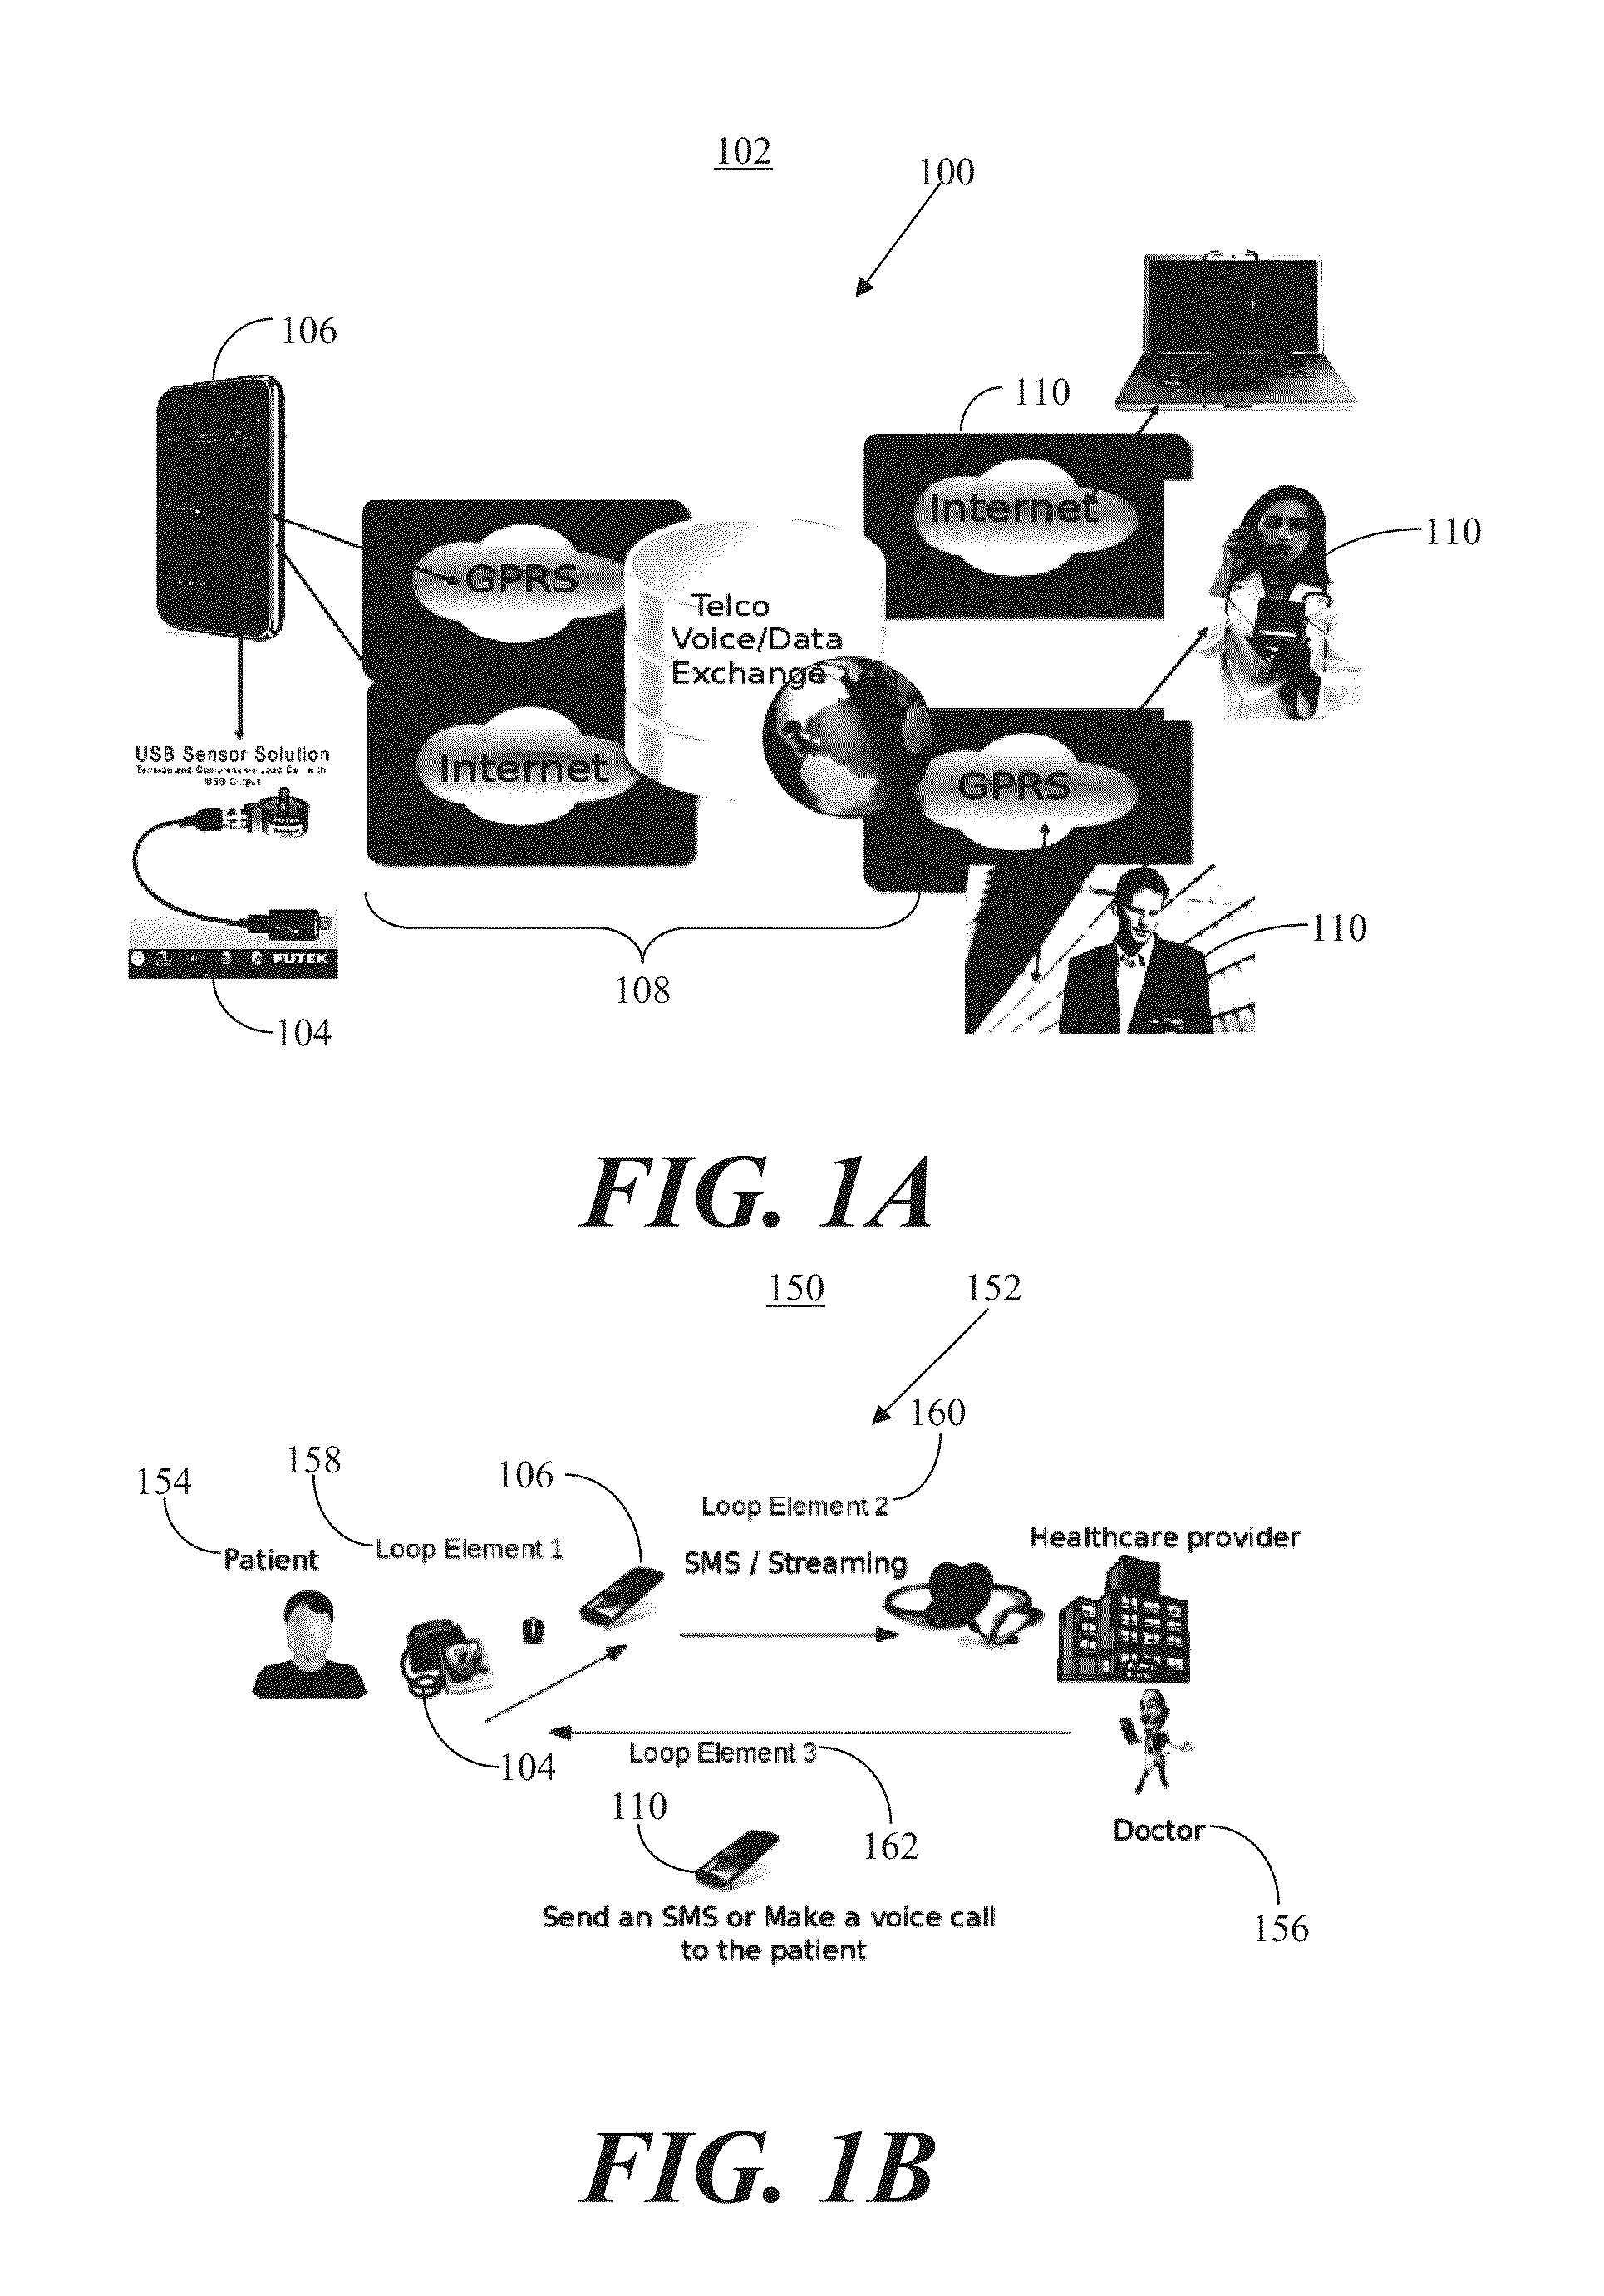 System and method for remote encounter and status assessment using parallel data and voice communication paths